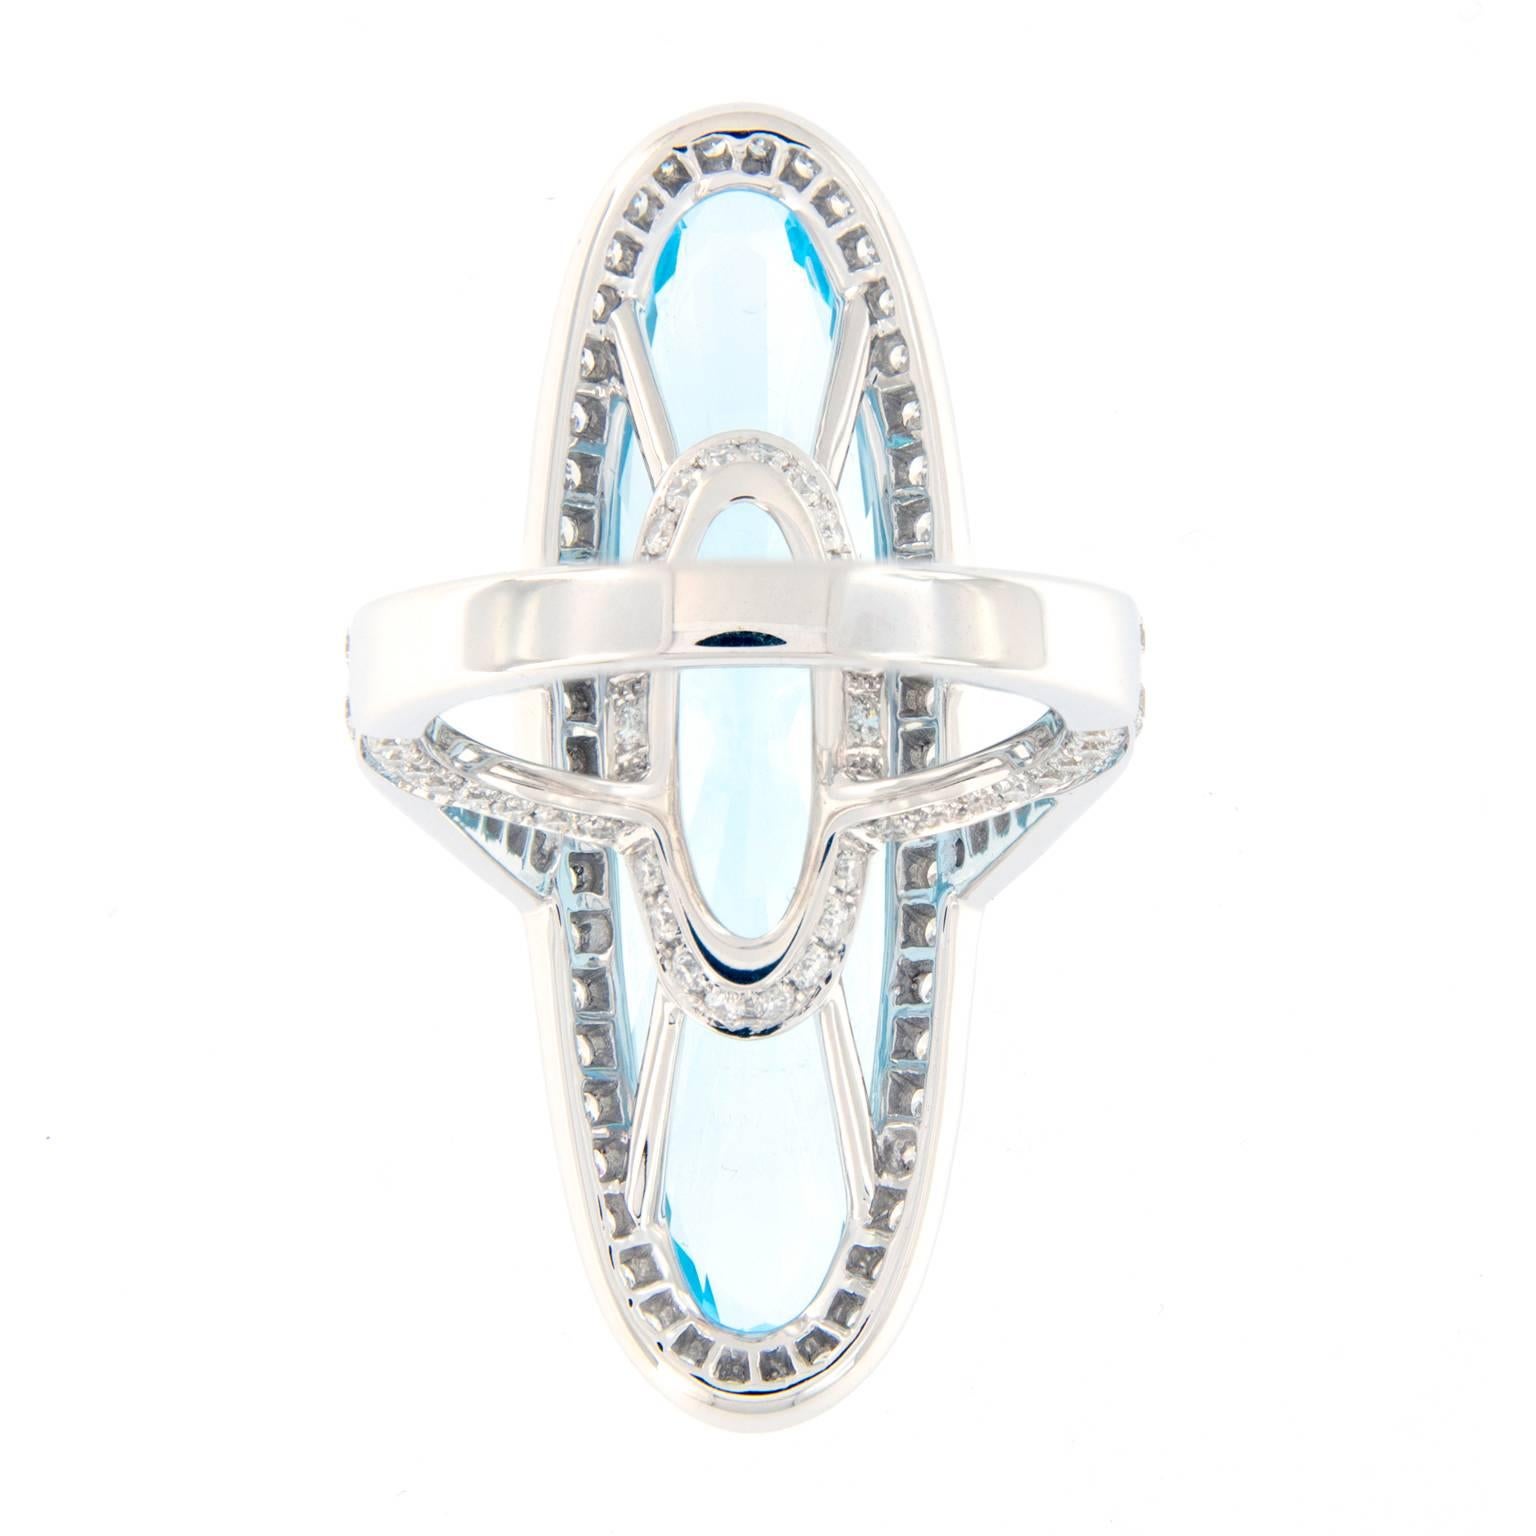 Dramatic and stunning cocktail ring showcases a long beautiful topaz with a diamond halo and diamonds set in a split shank. Ring crafted in 18k white gold. Ring size 6.5. Weighs 13 grams

Topaz 17.55 ct.
Diamond 1.37 ctw